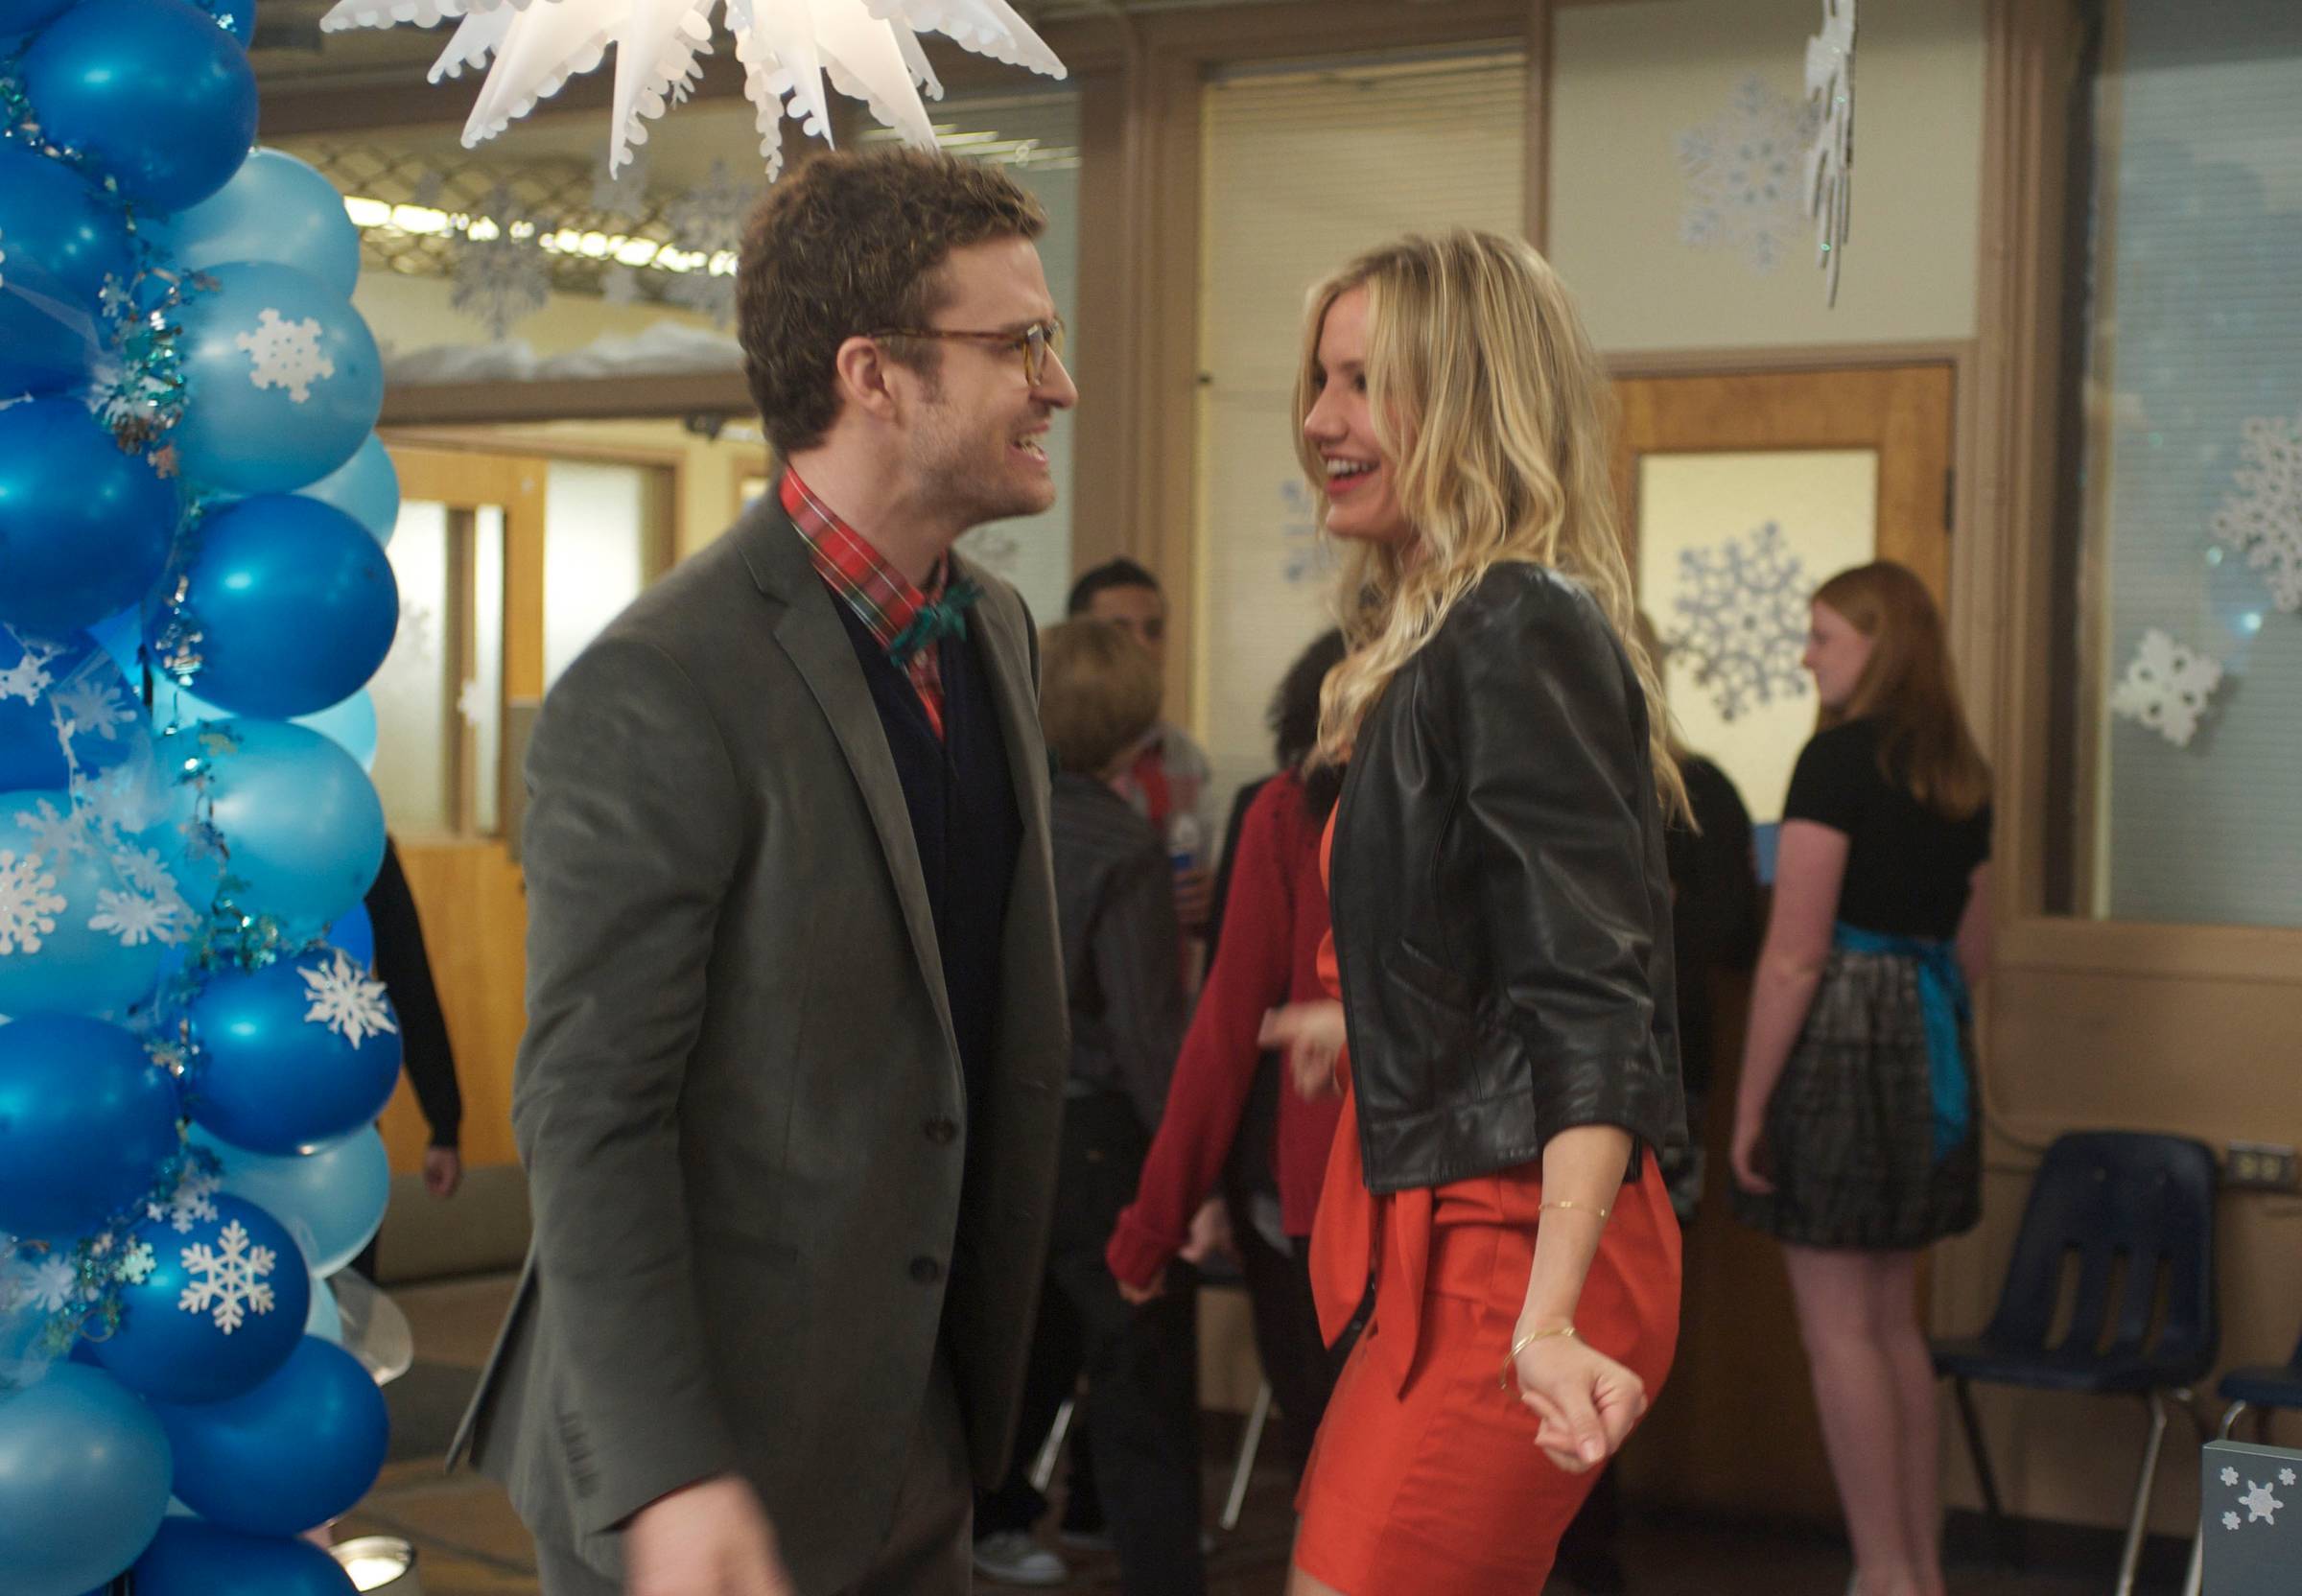 Justin Timberlake and Cameron Diaz in Columbia Pictues' comedy "Bad Teacher."